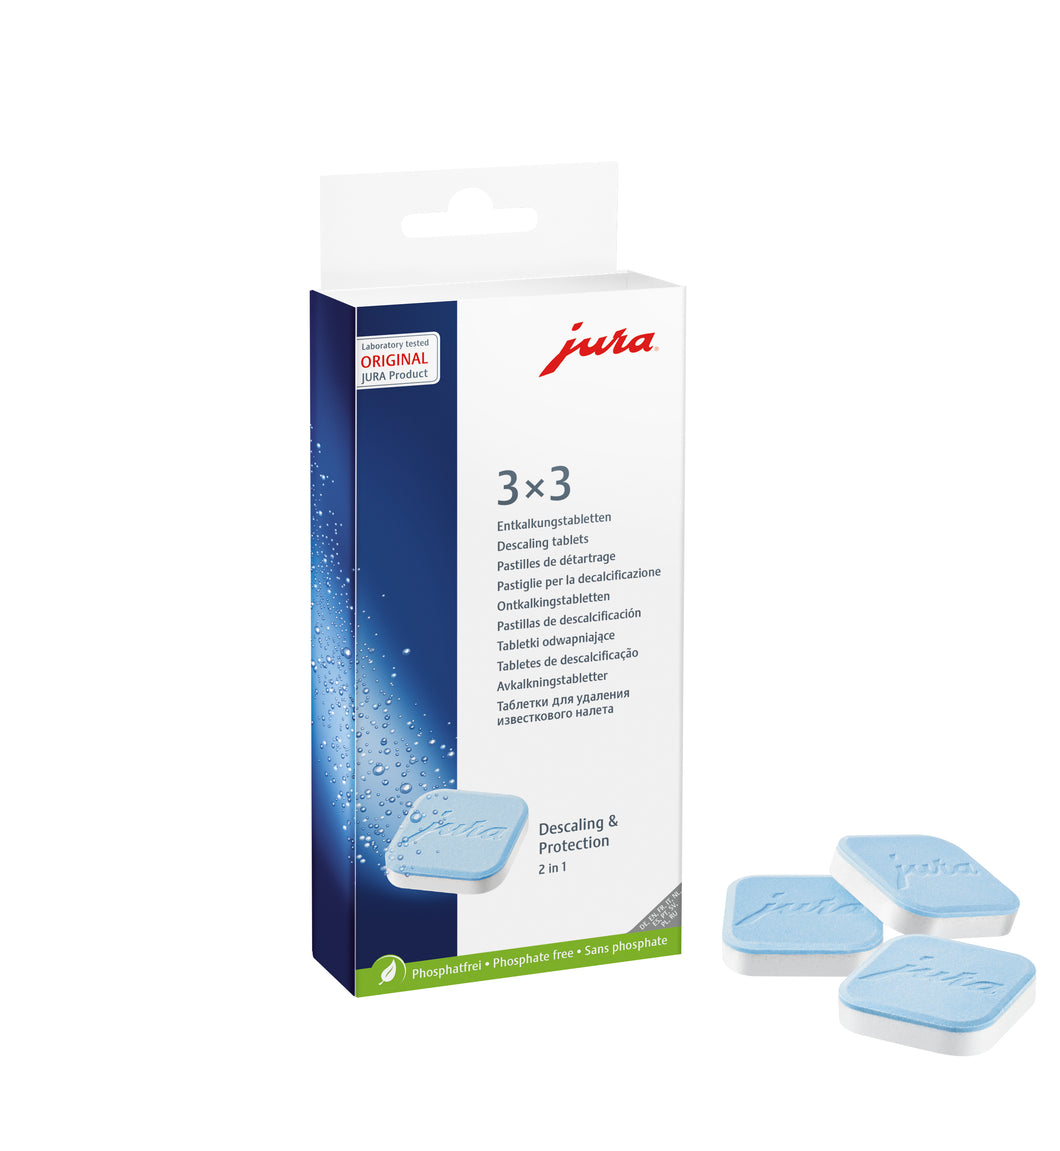 3X3 Jura 2-phase descaling tablets.